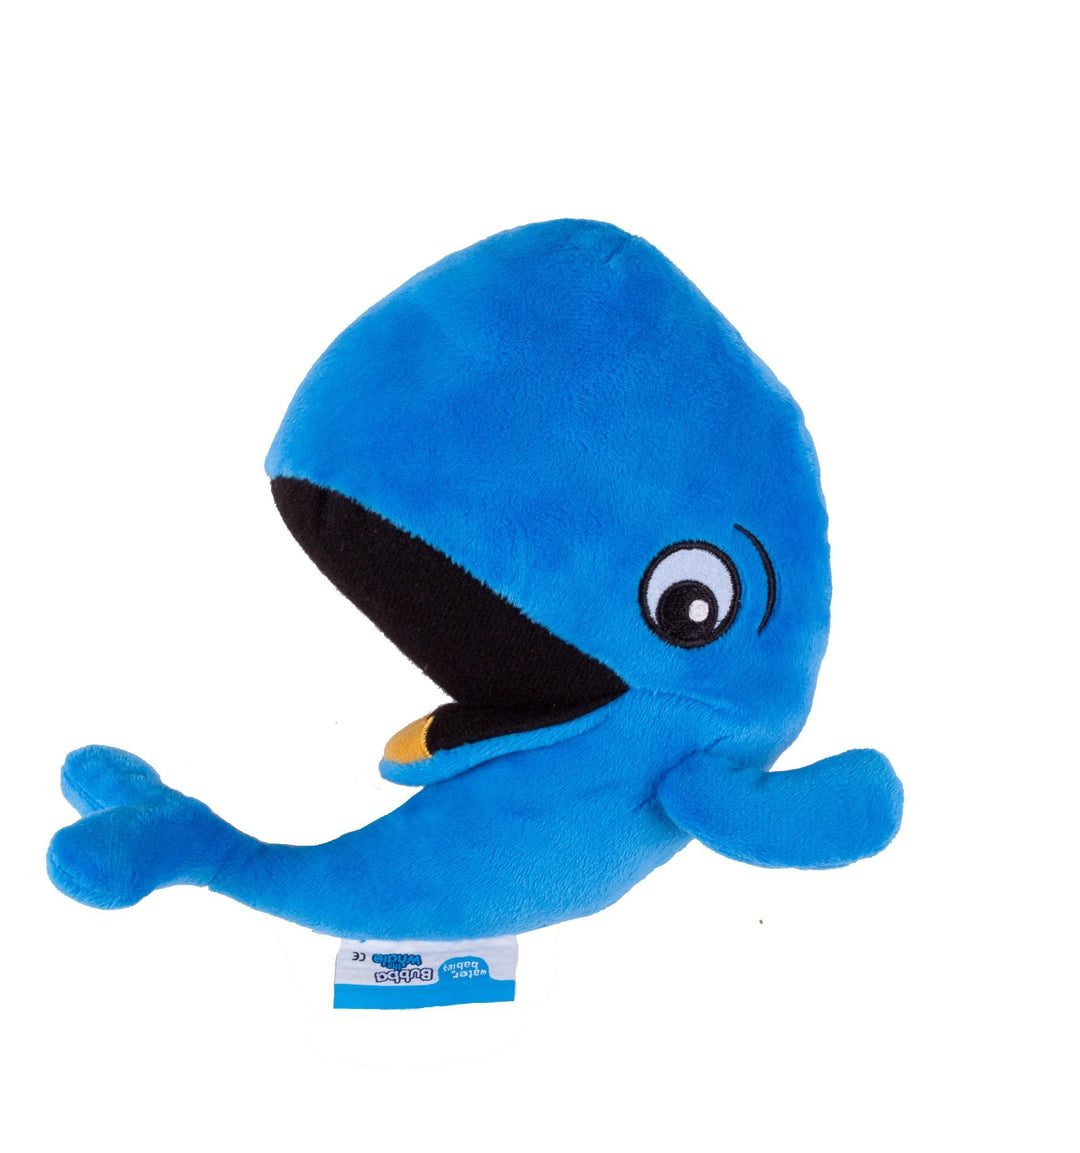 Bubba the Whale soft toy